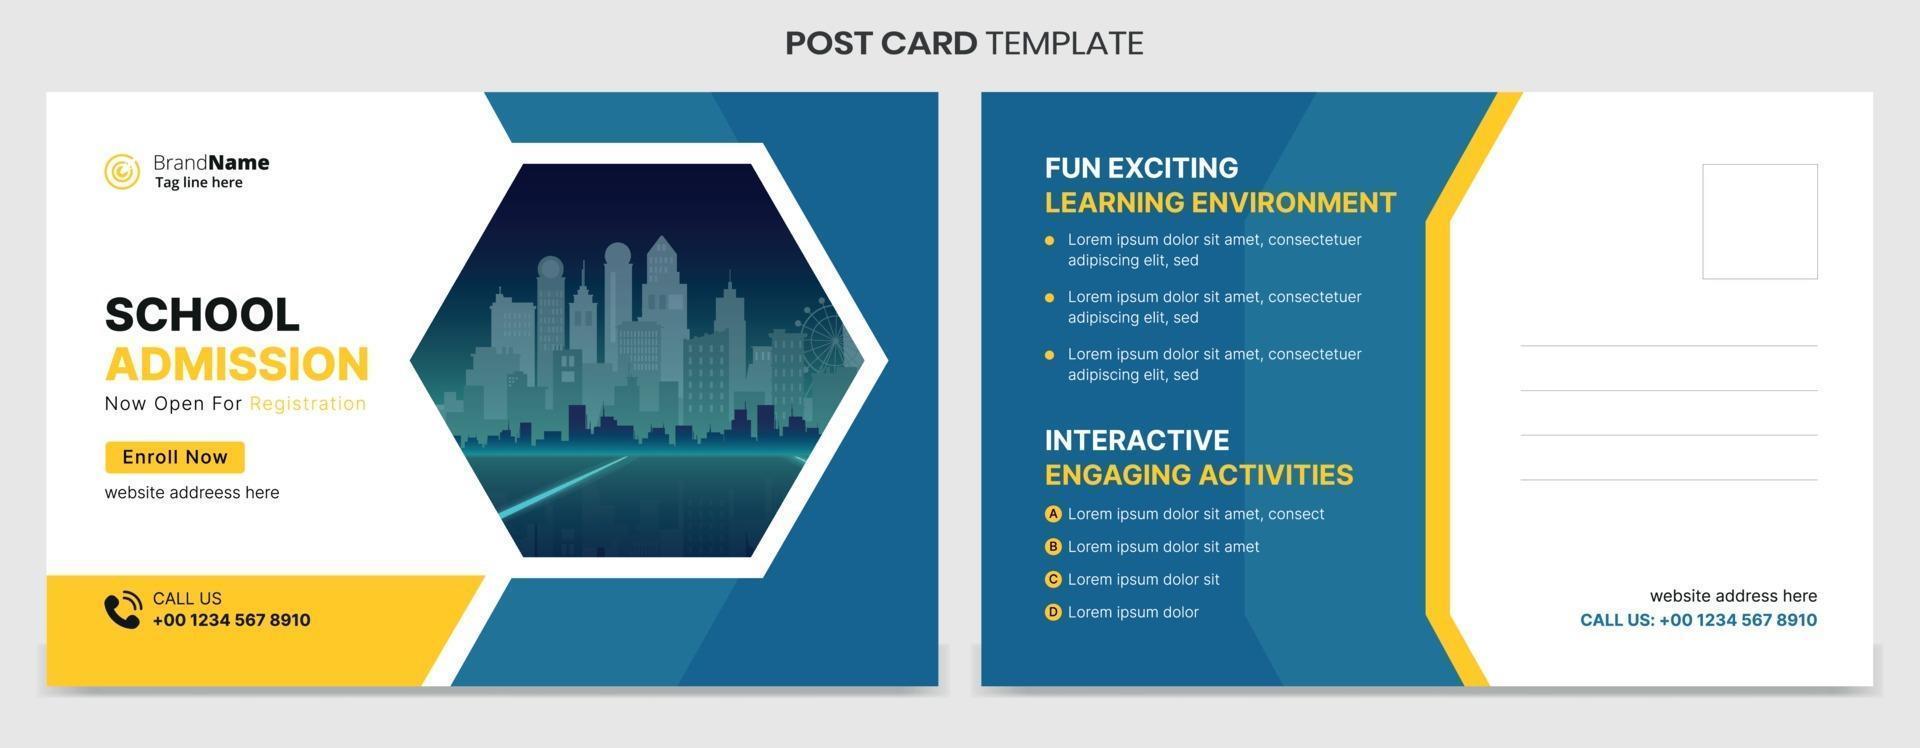 Modern and professional postcard template design vector